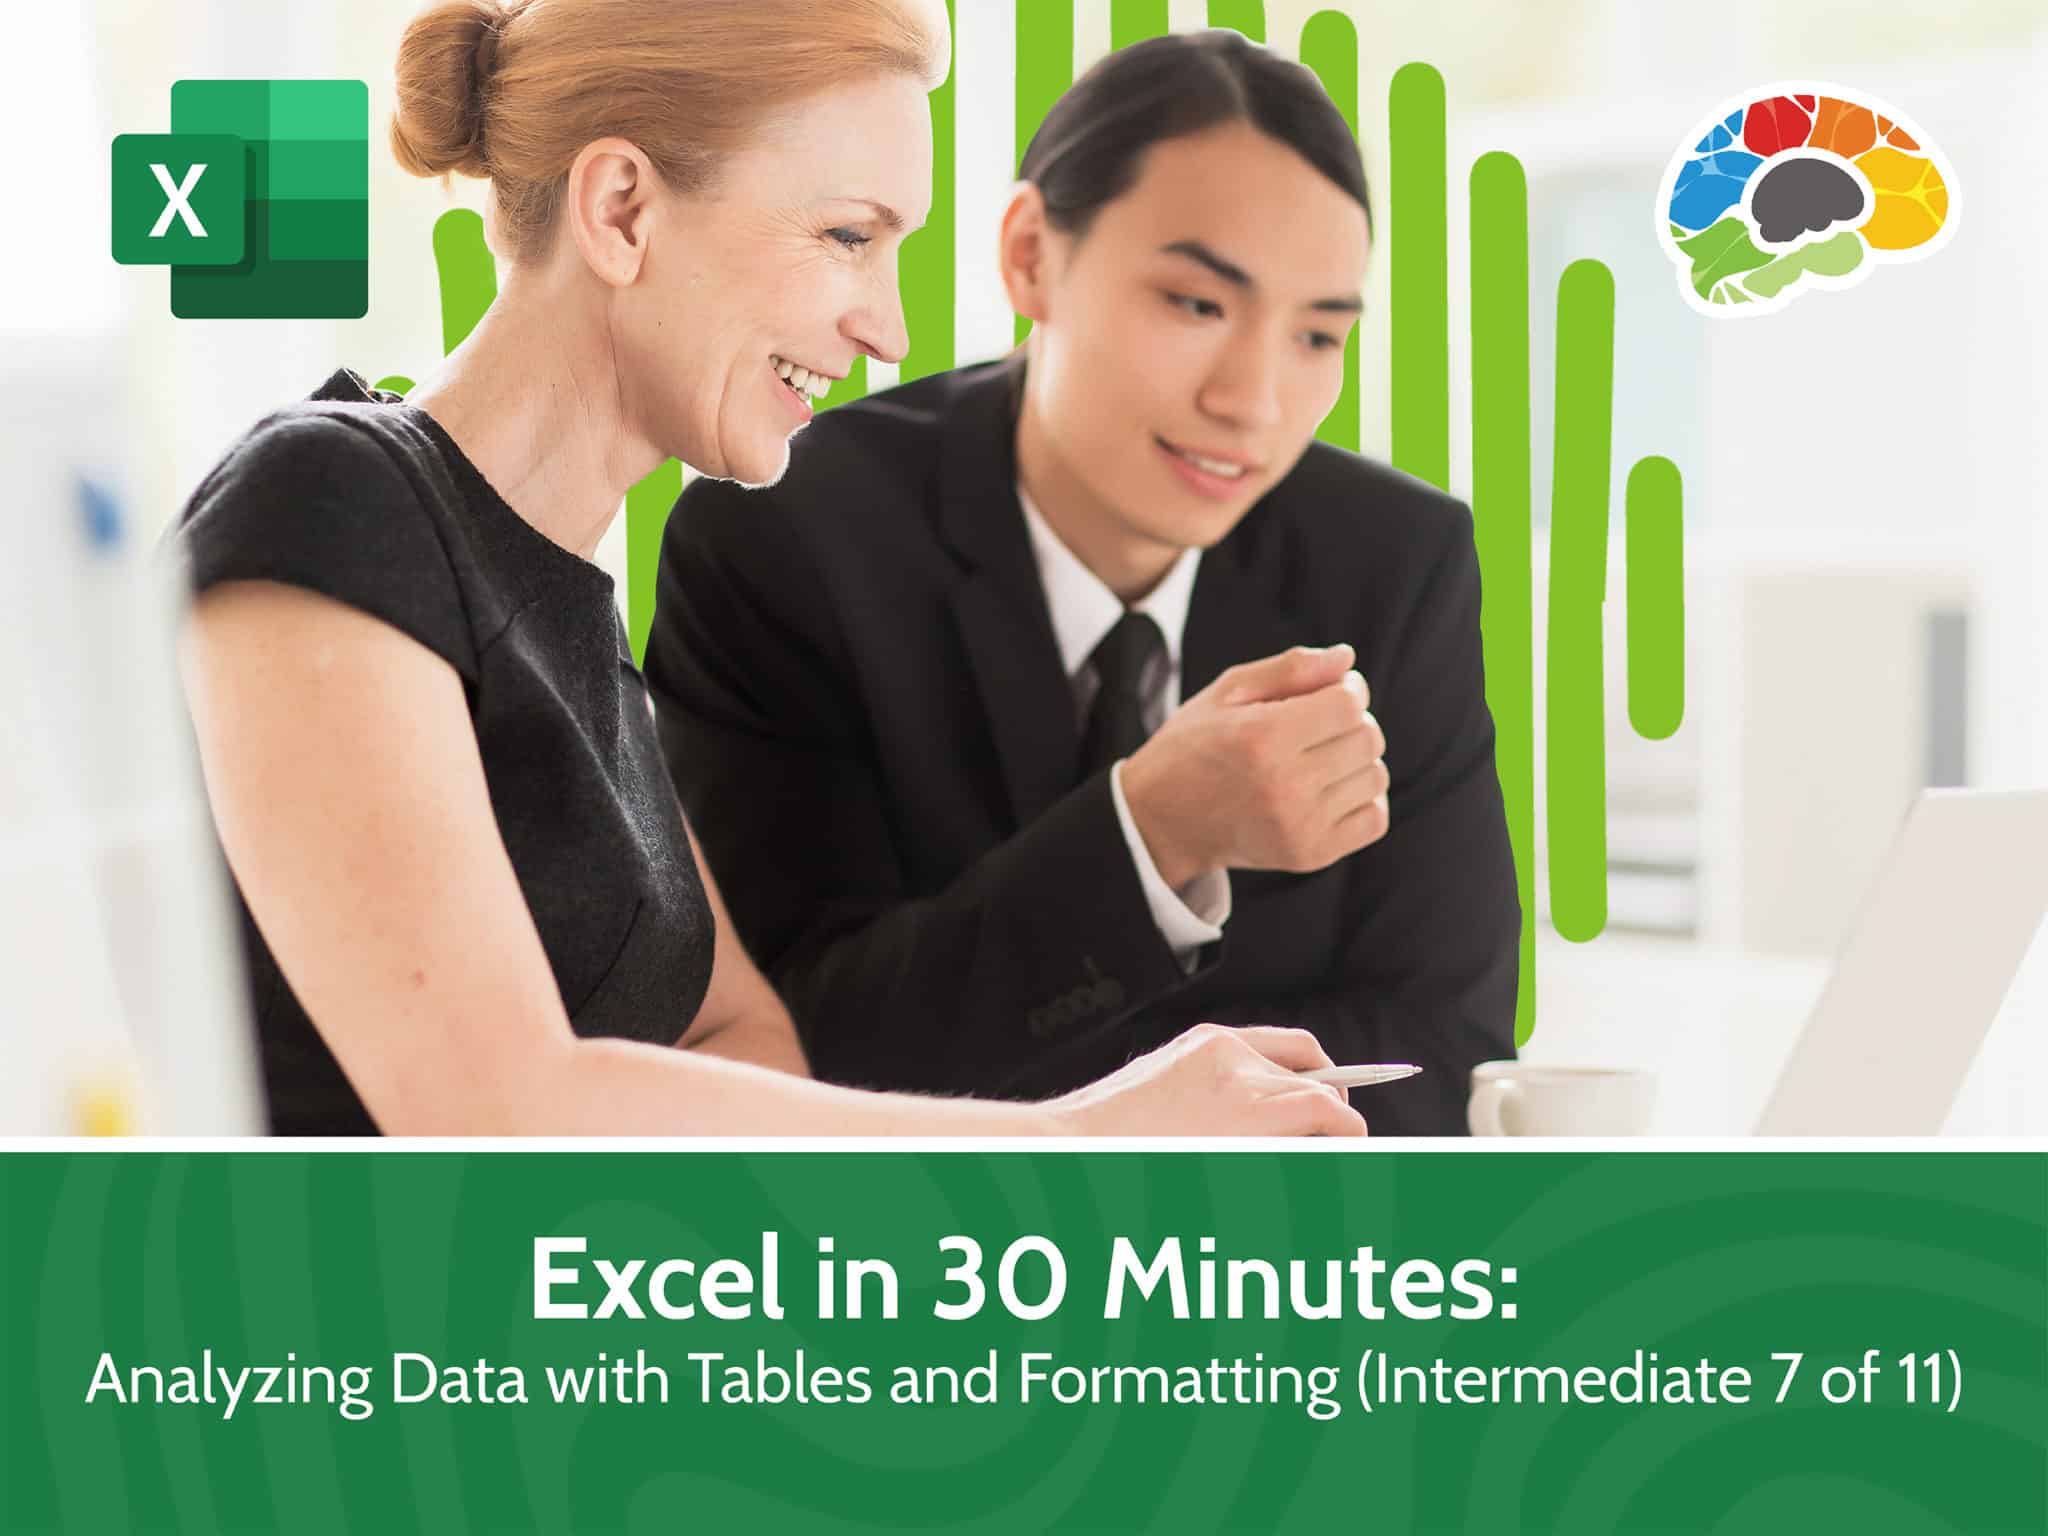 Excel in 30 Minutes Analyzing Data with Tables and Formatting scaled